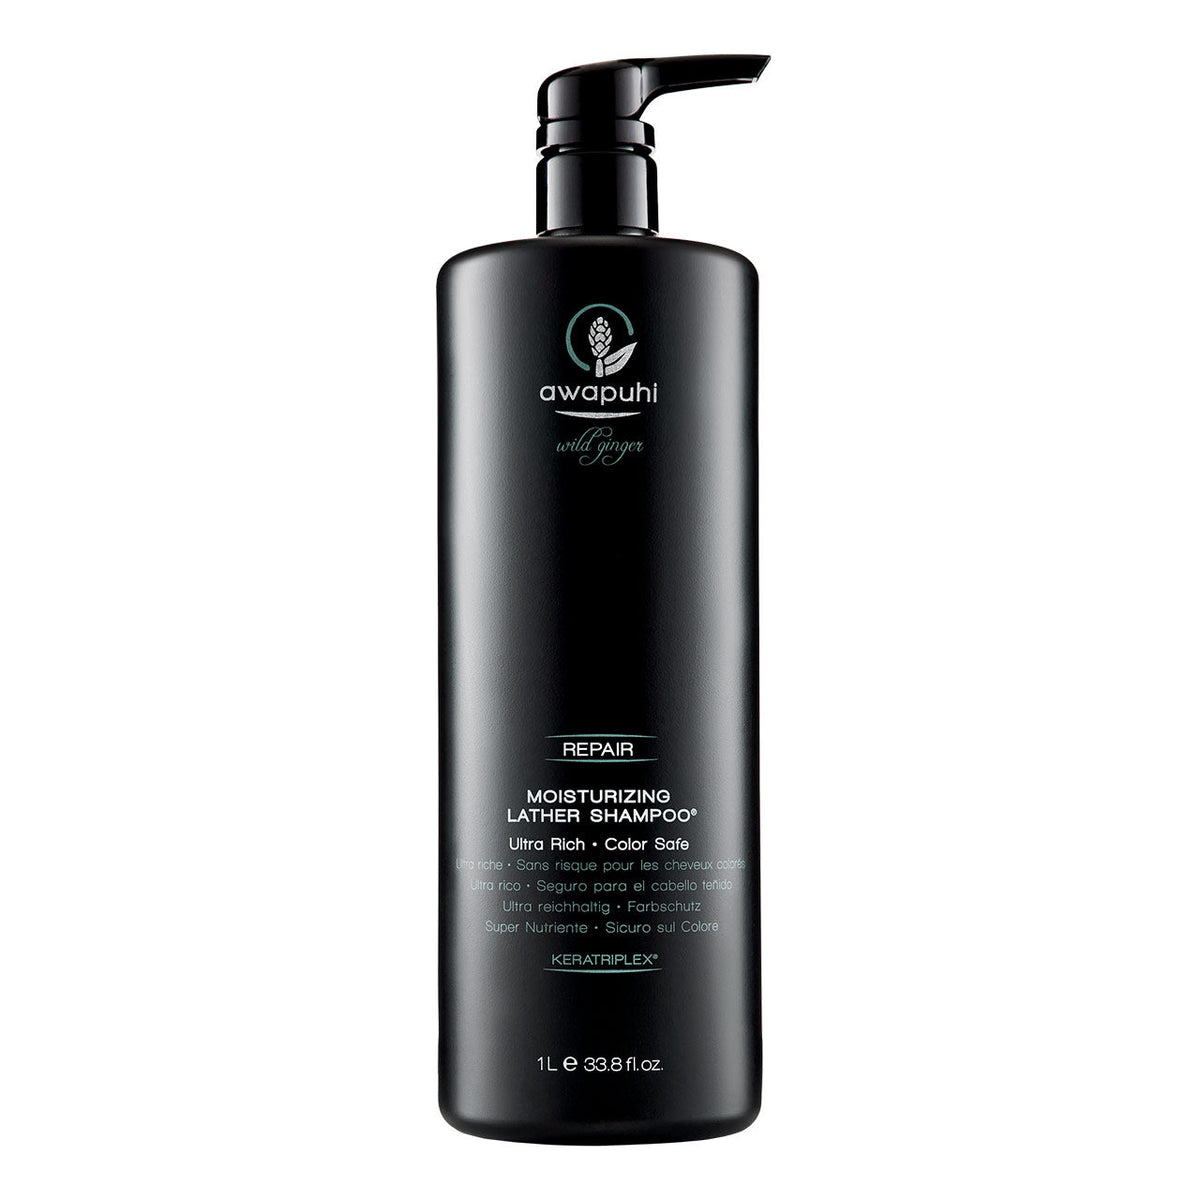 Awapuhi Wild Ginger Repair Moisturizing Lather Shampoo - 1L - by Paul Mitchell |ProCare Outlet|